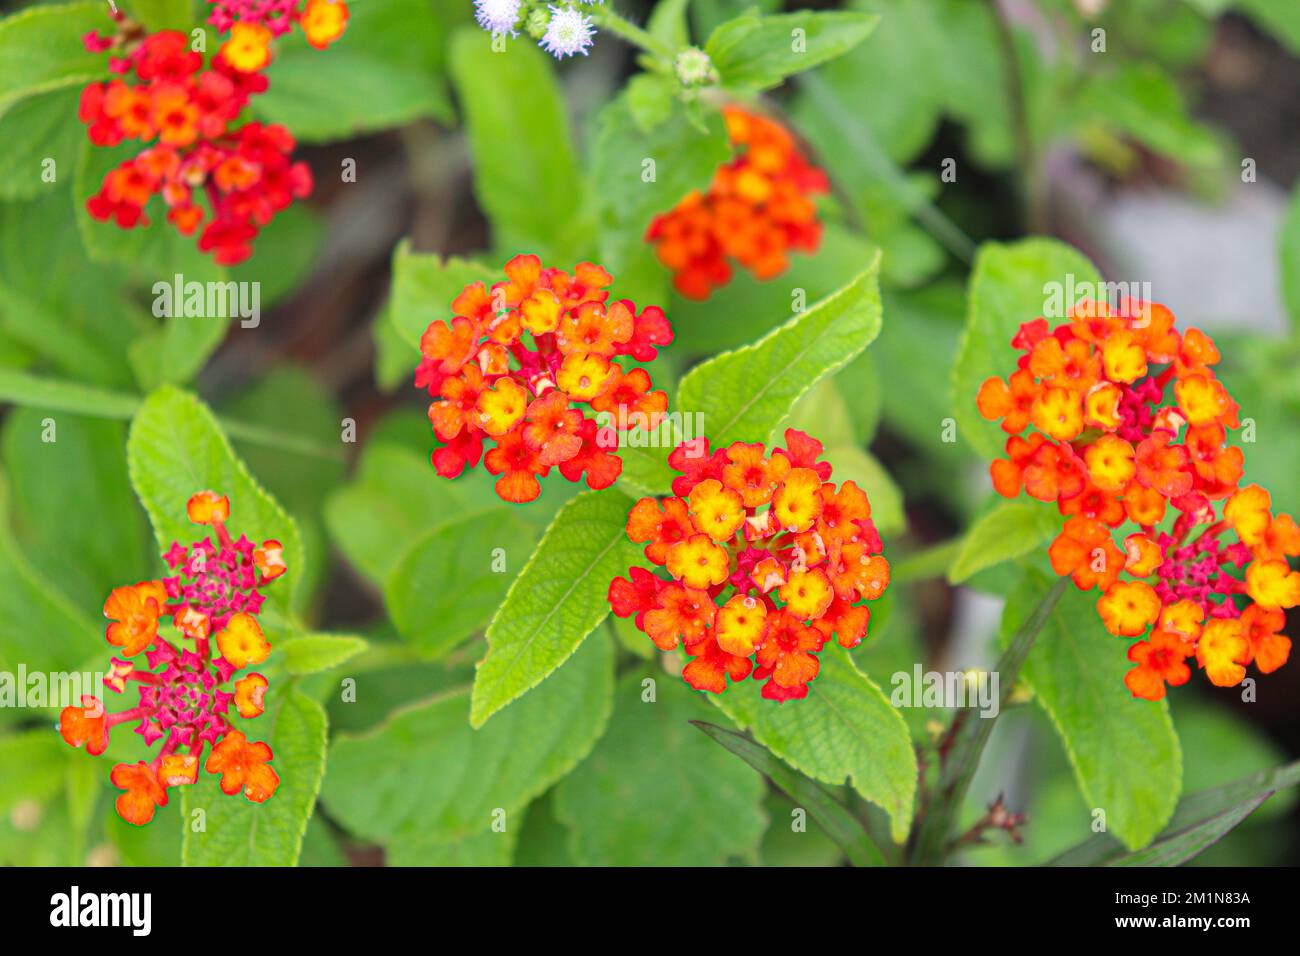 red colored lantana flower on tree in garden Stock Photo